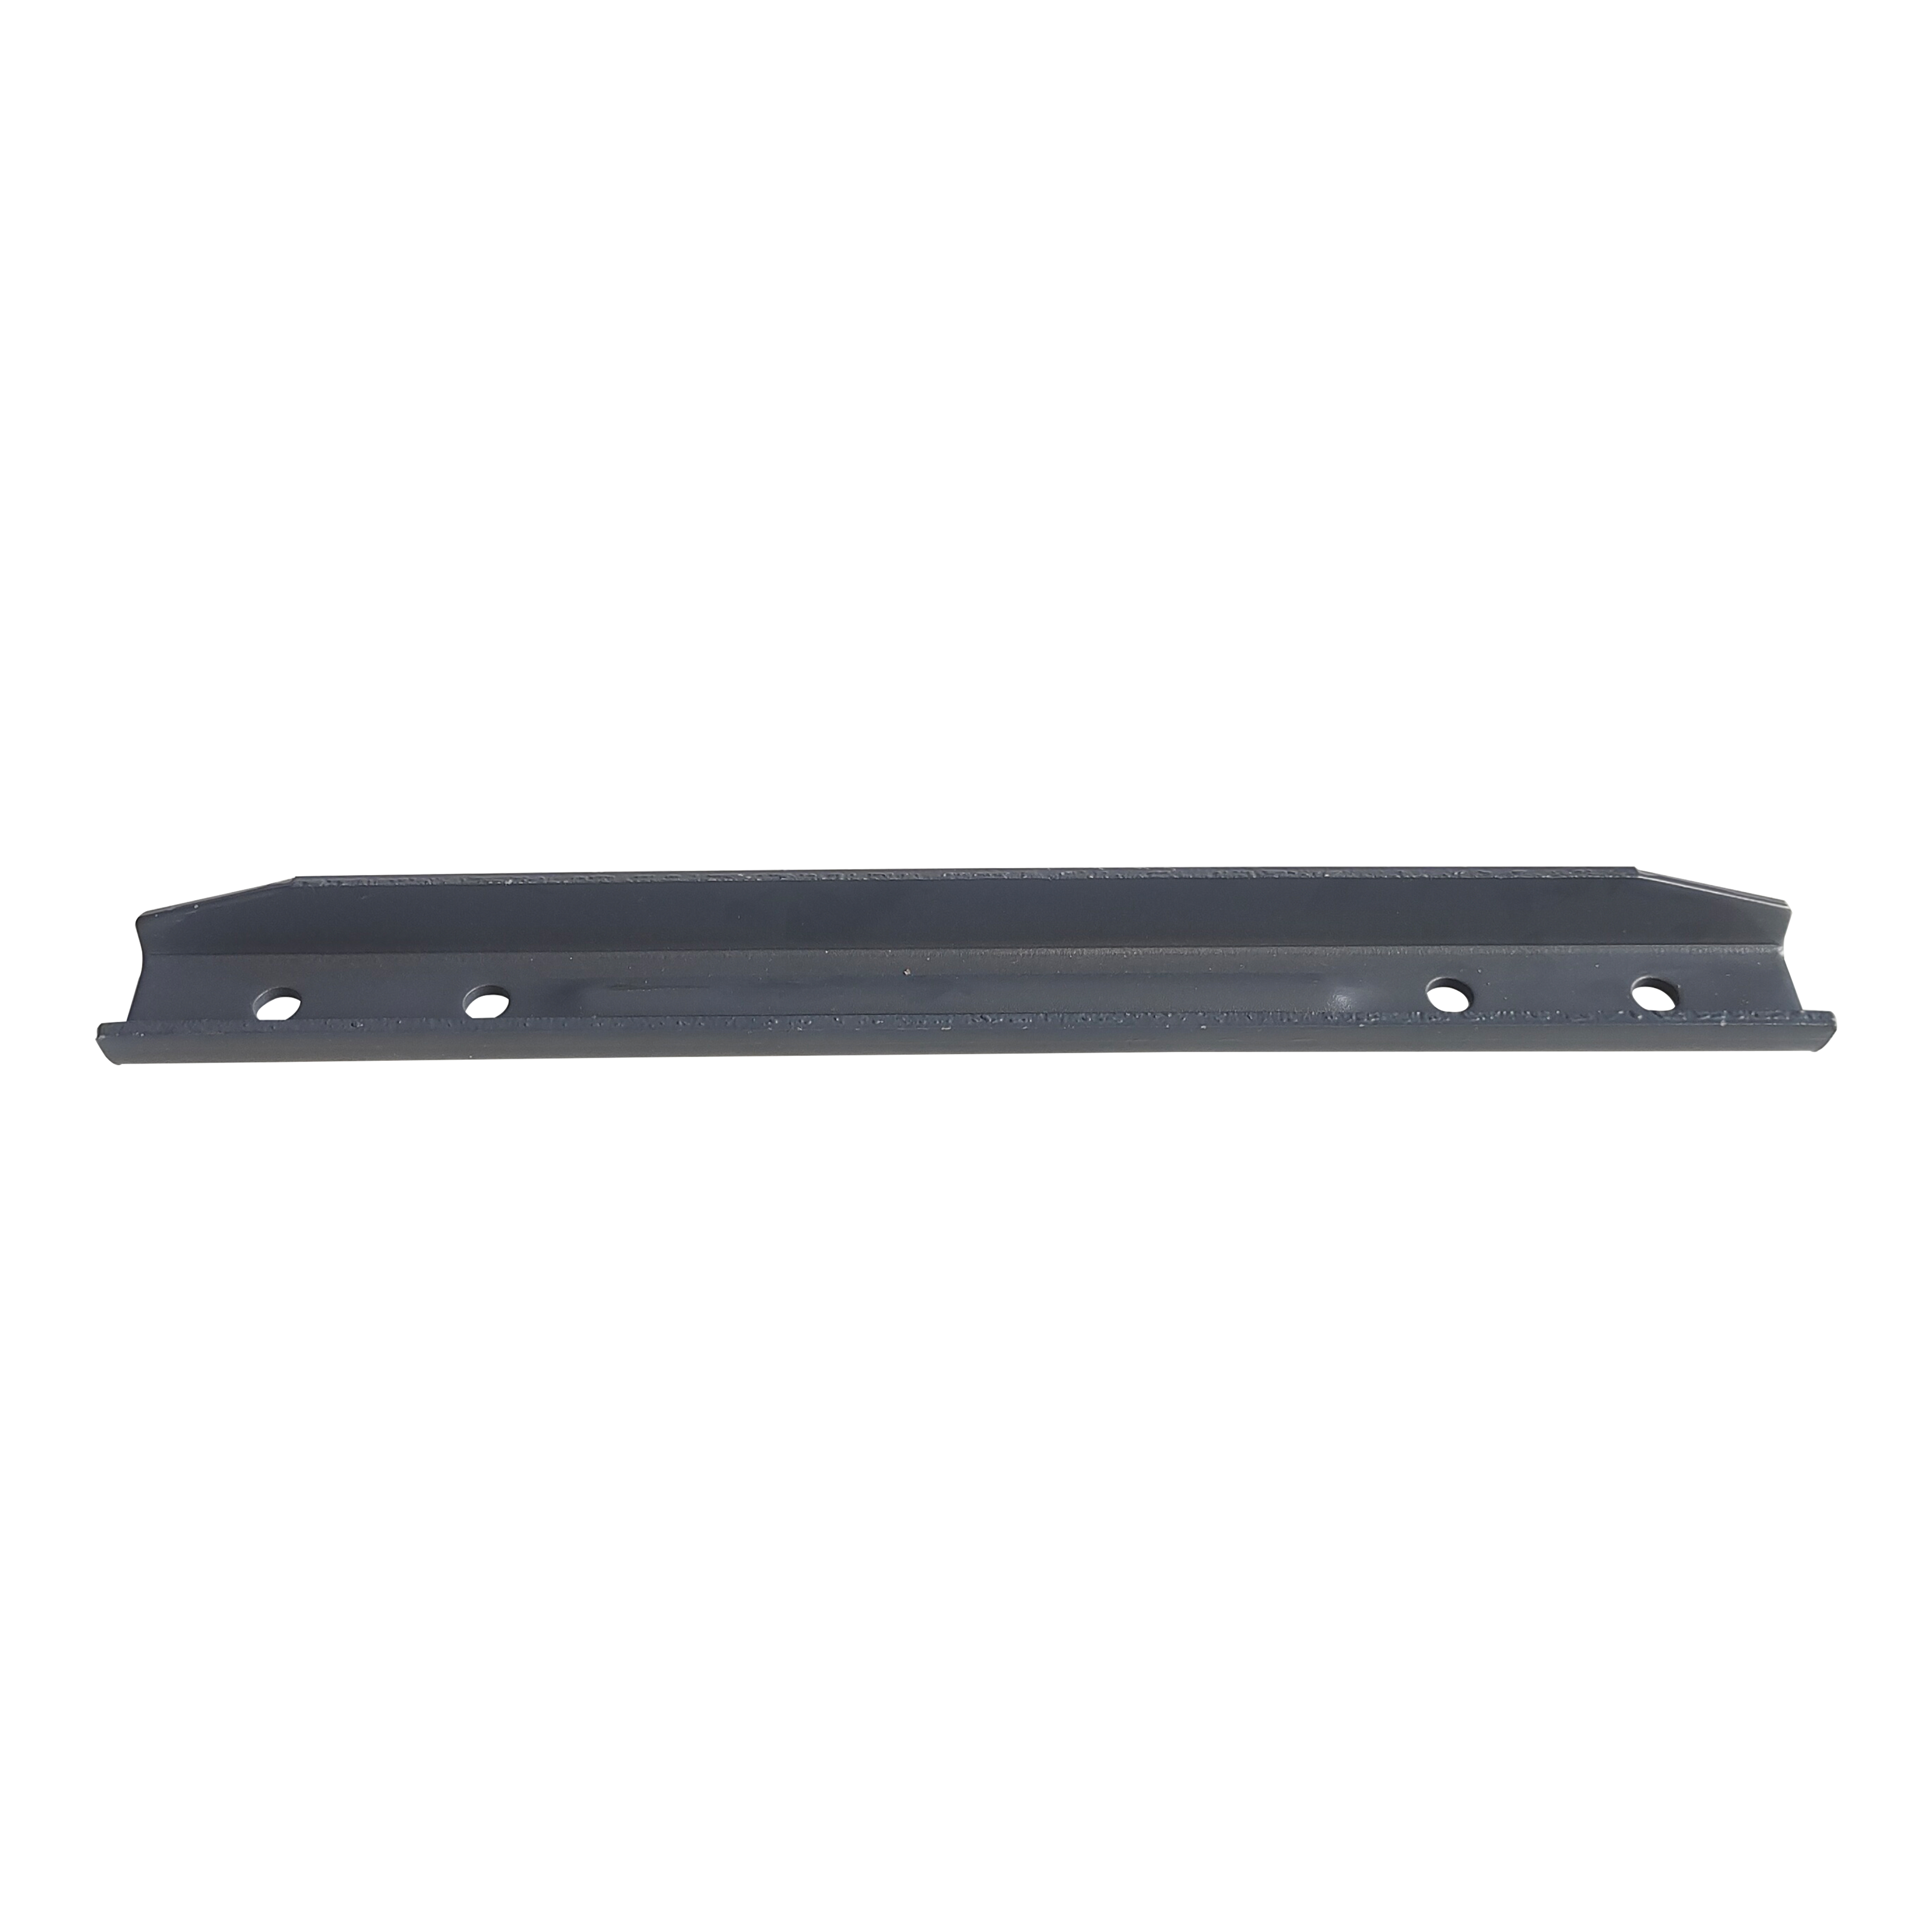 kubota DC35 harvester parts 5T081-46330 high quality steel Chain plate PLATE CARRIER